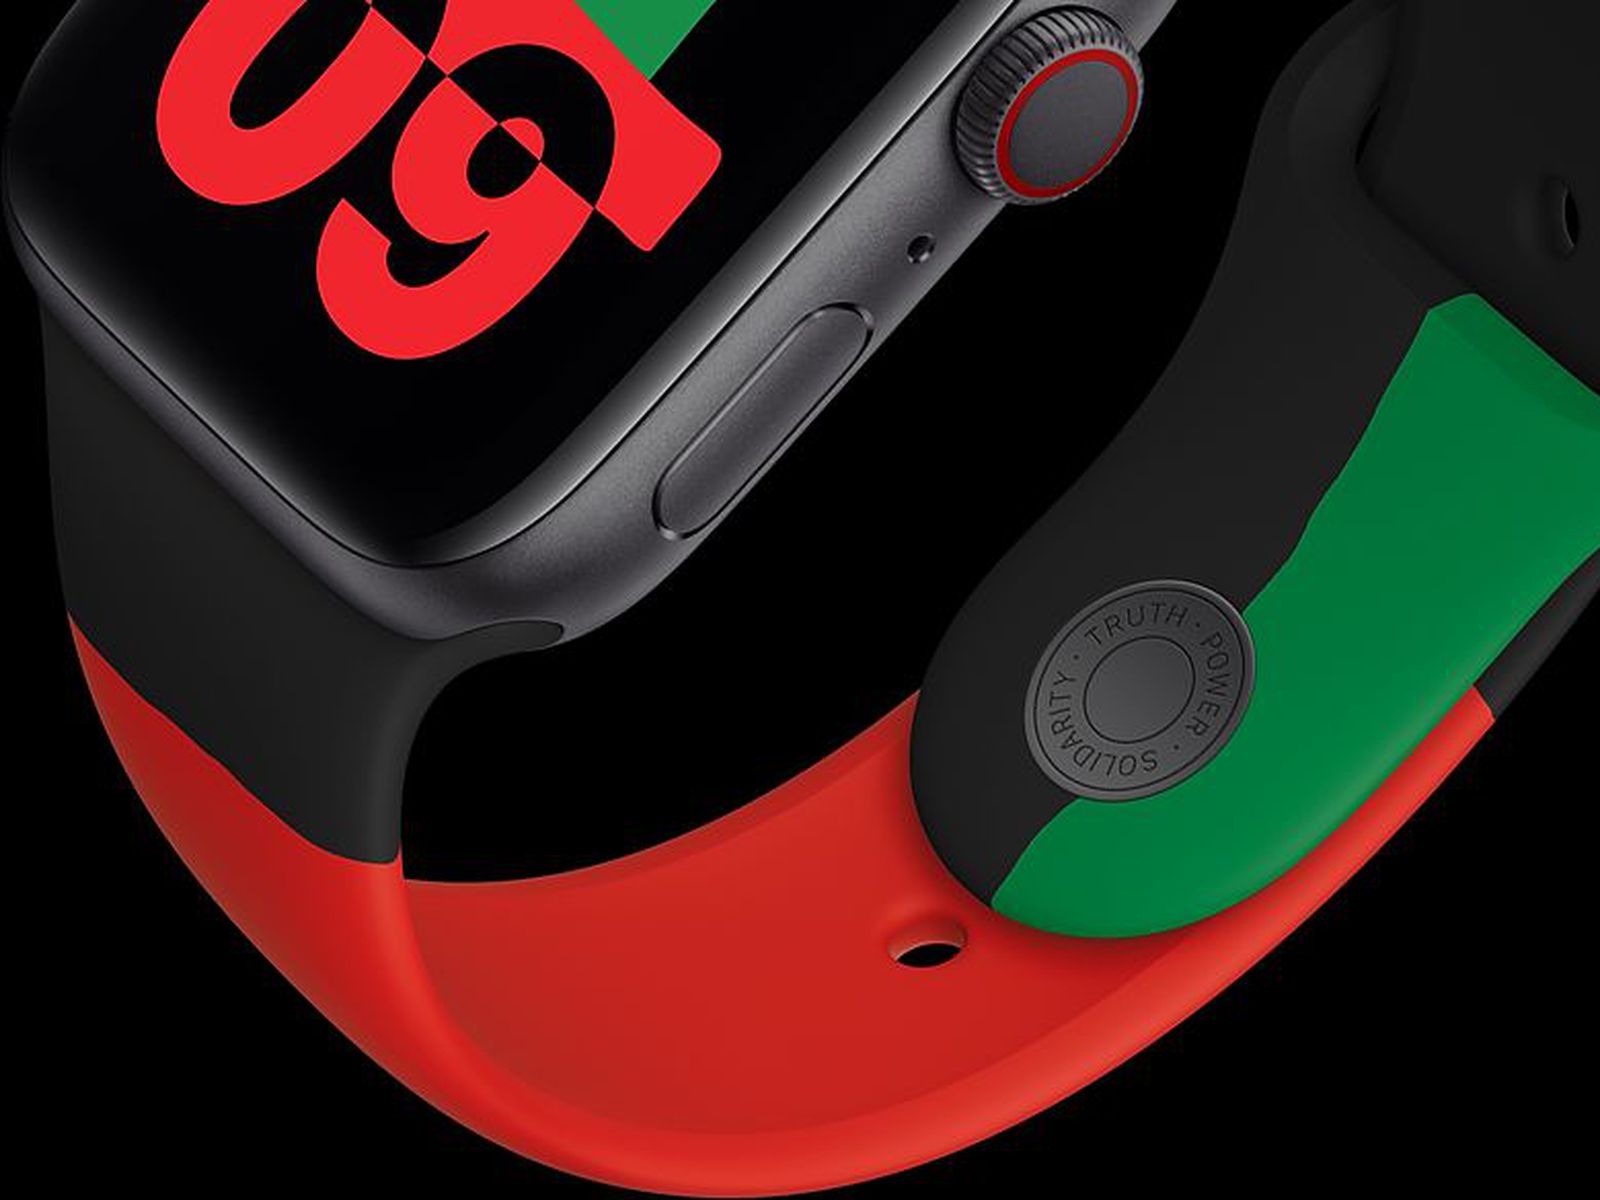 Limited Edition Black Unity Apple Watch Series 6 And Sport Band Now Available To Order Macrumors